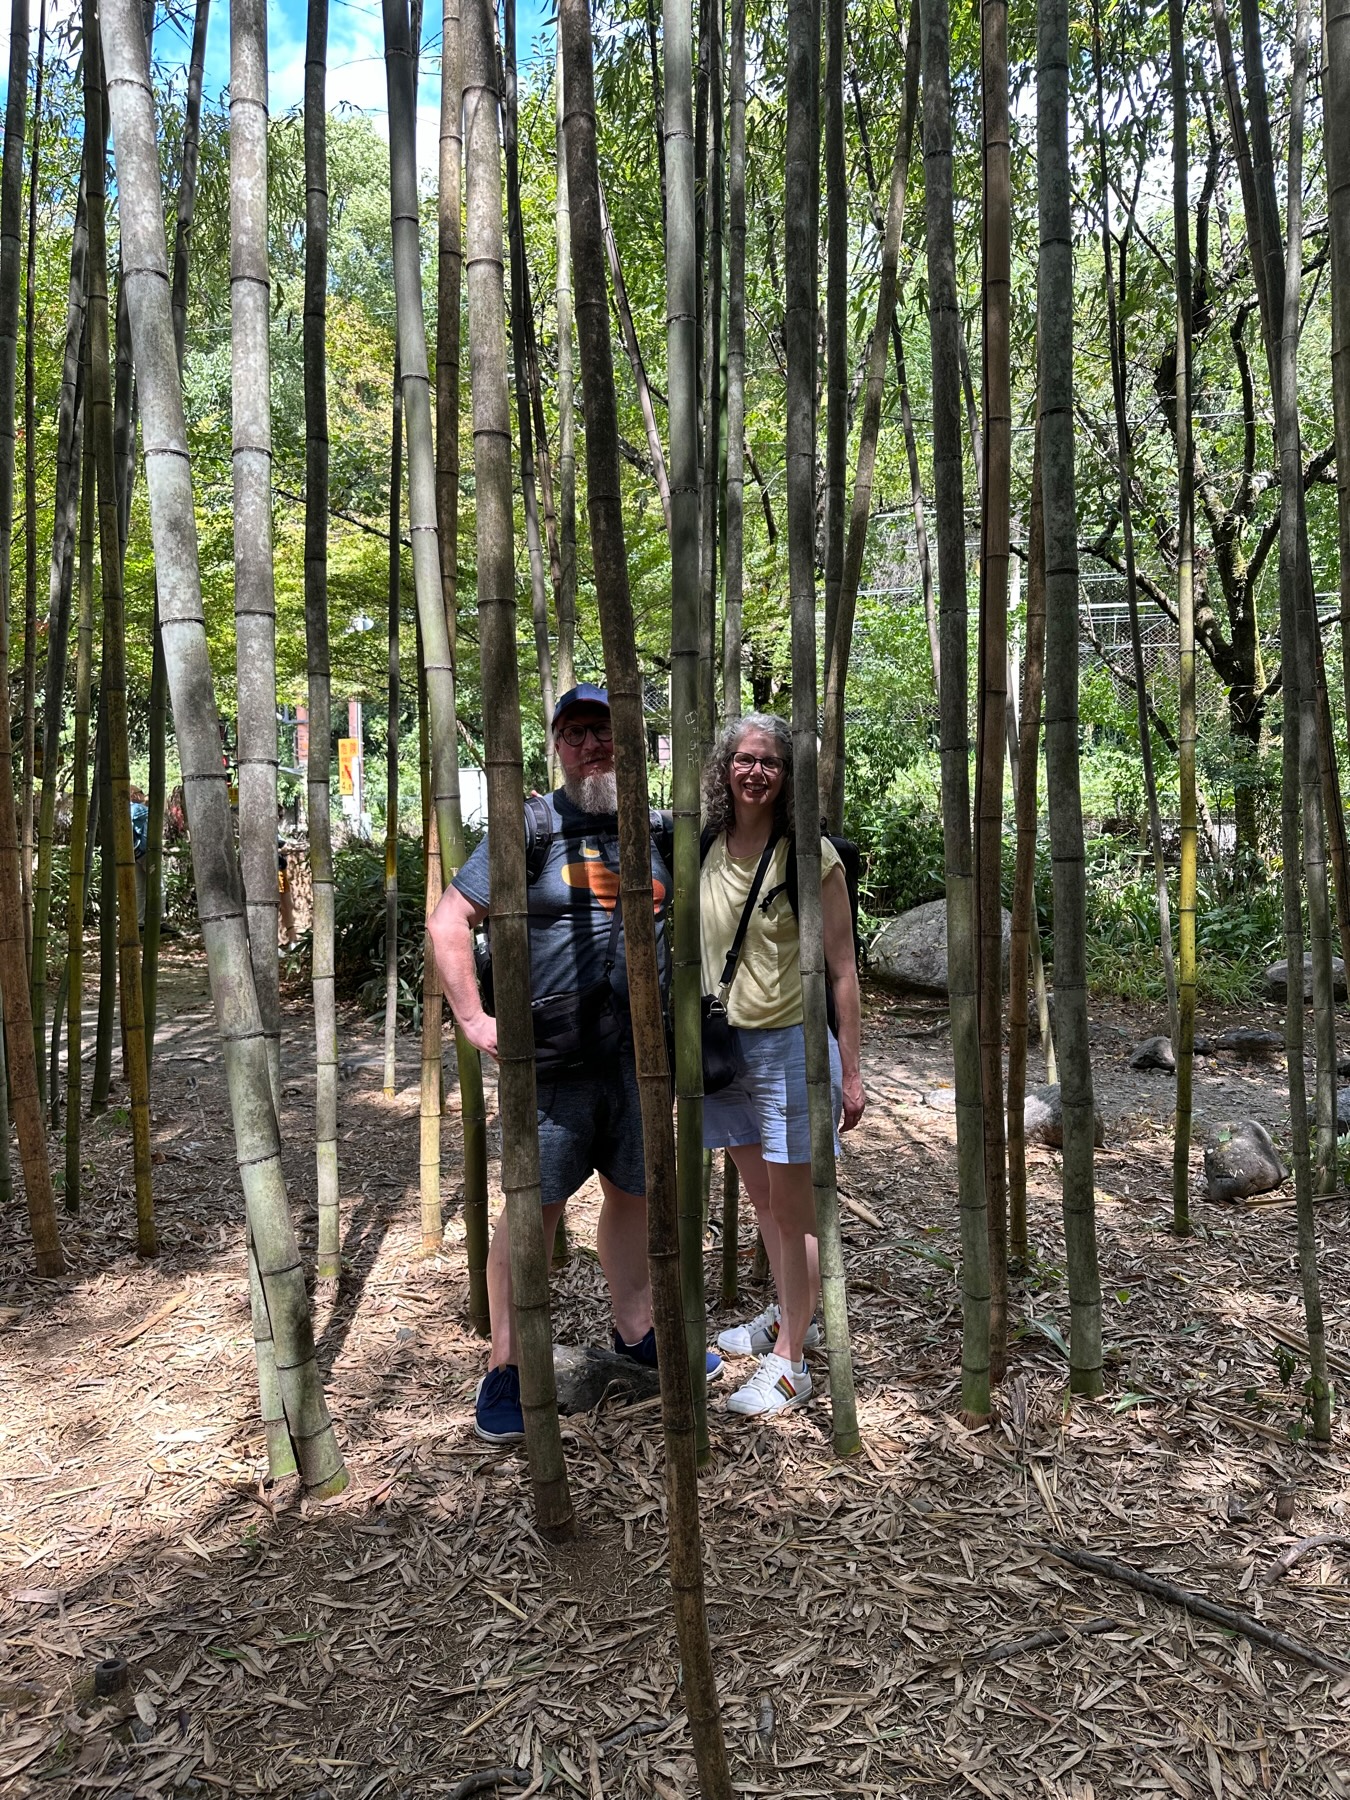 Me and my wife posing in the middle of the bamboo